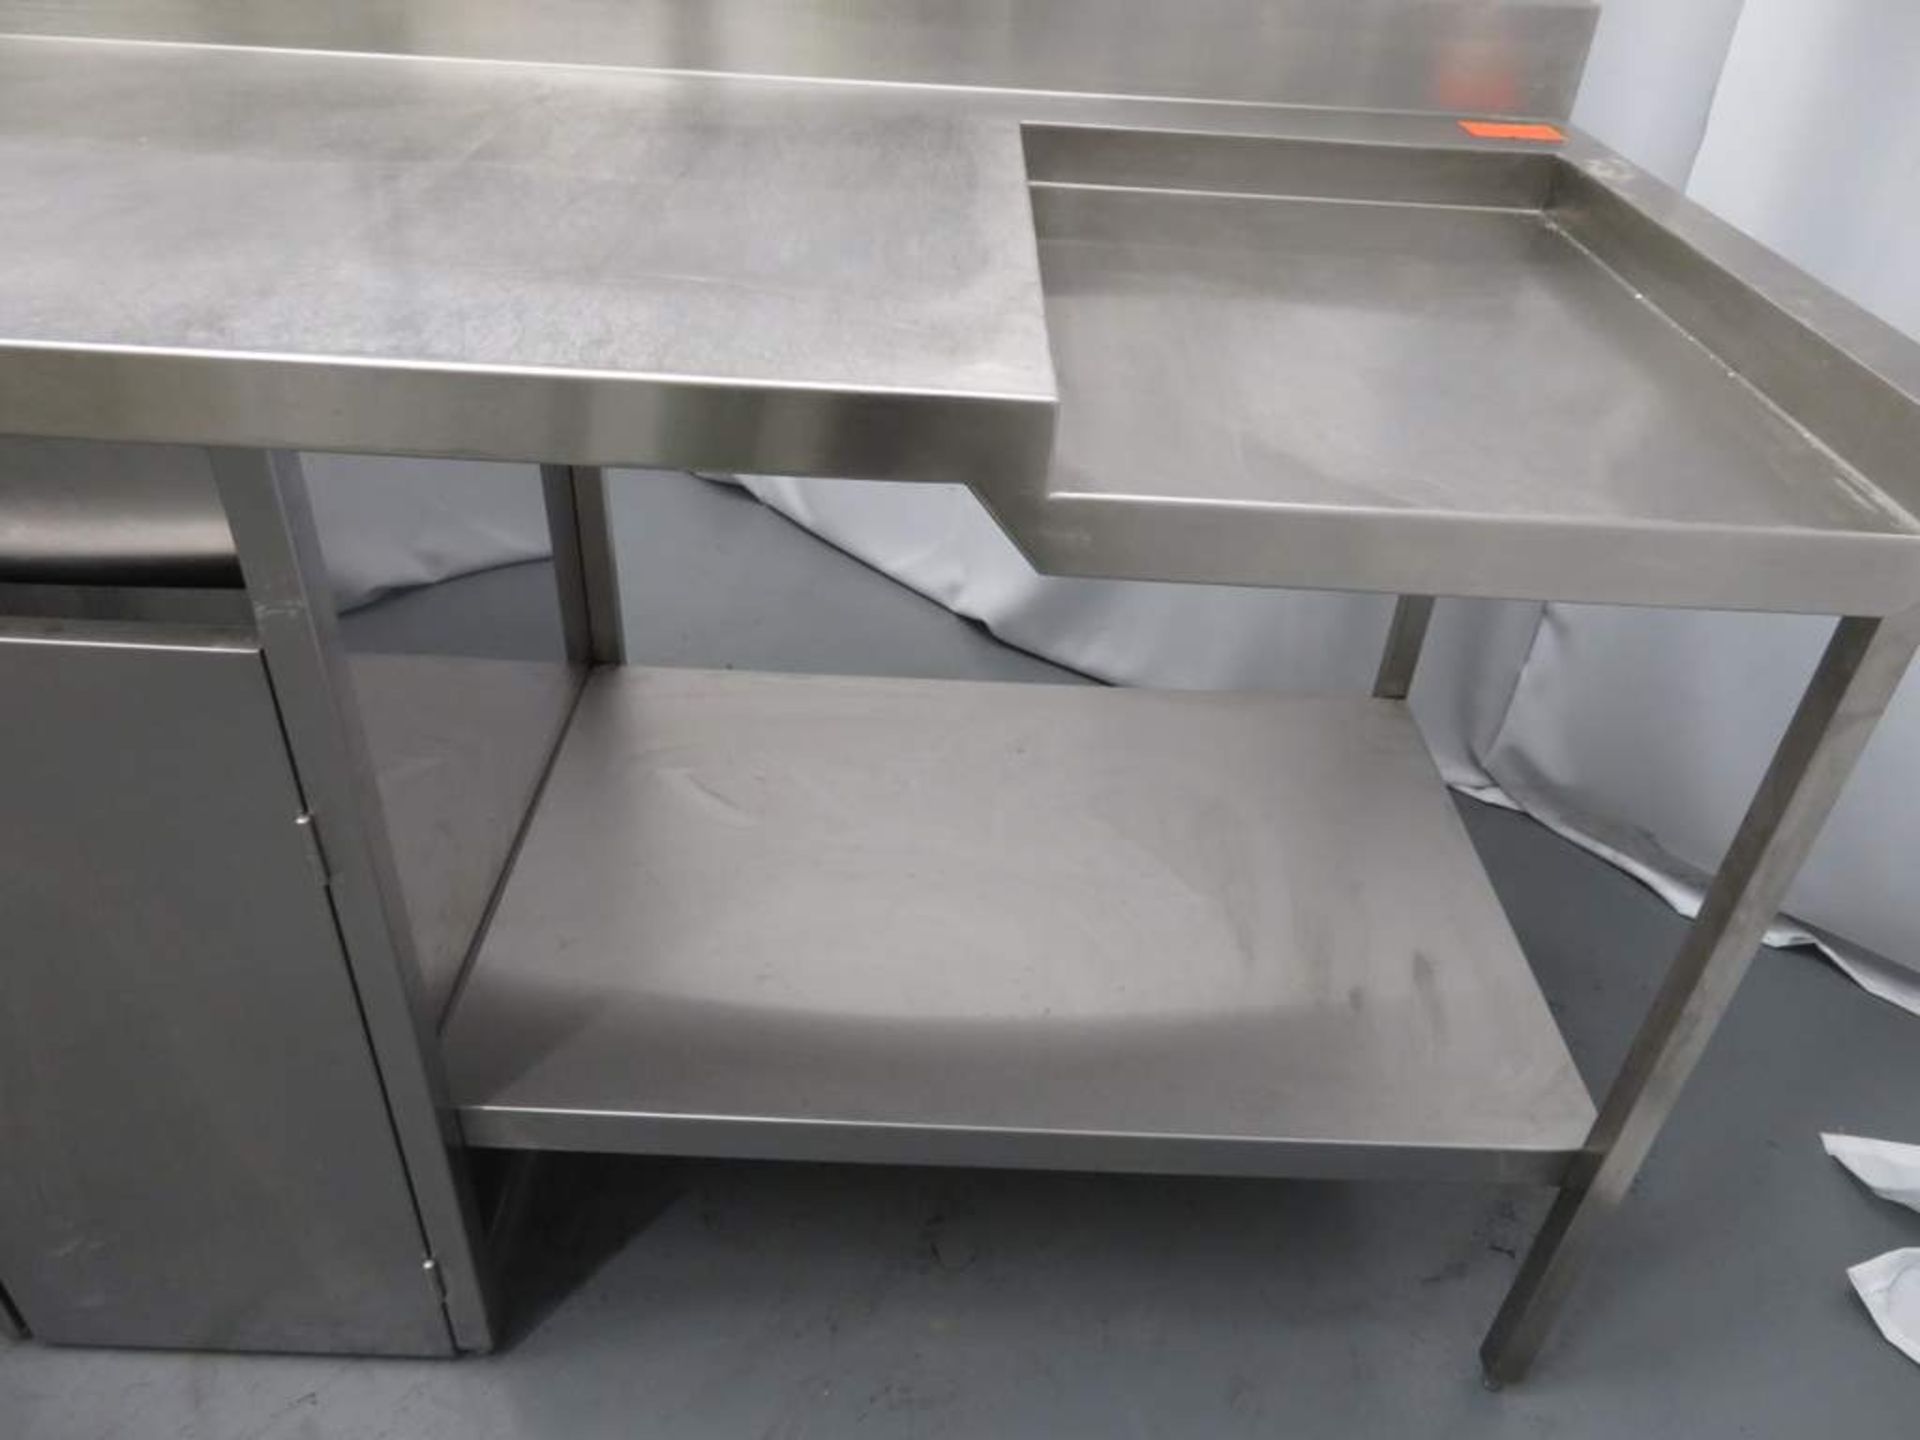 Stainless Steel Multi Purpose Prep Worktable. Dimensions: 2900x800x1200mm (LxWxH) - Image 5 of 7